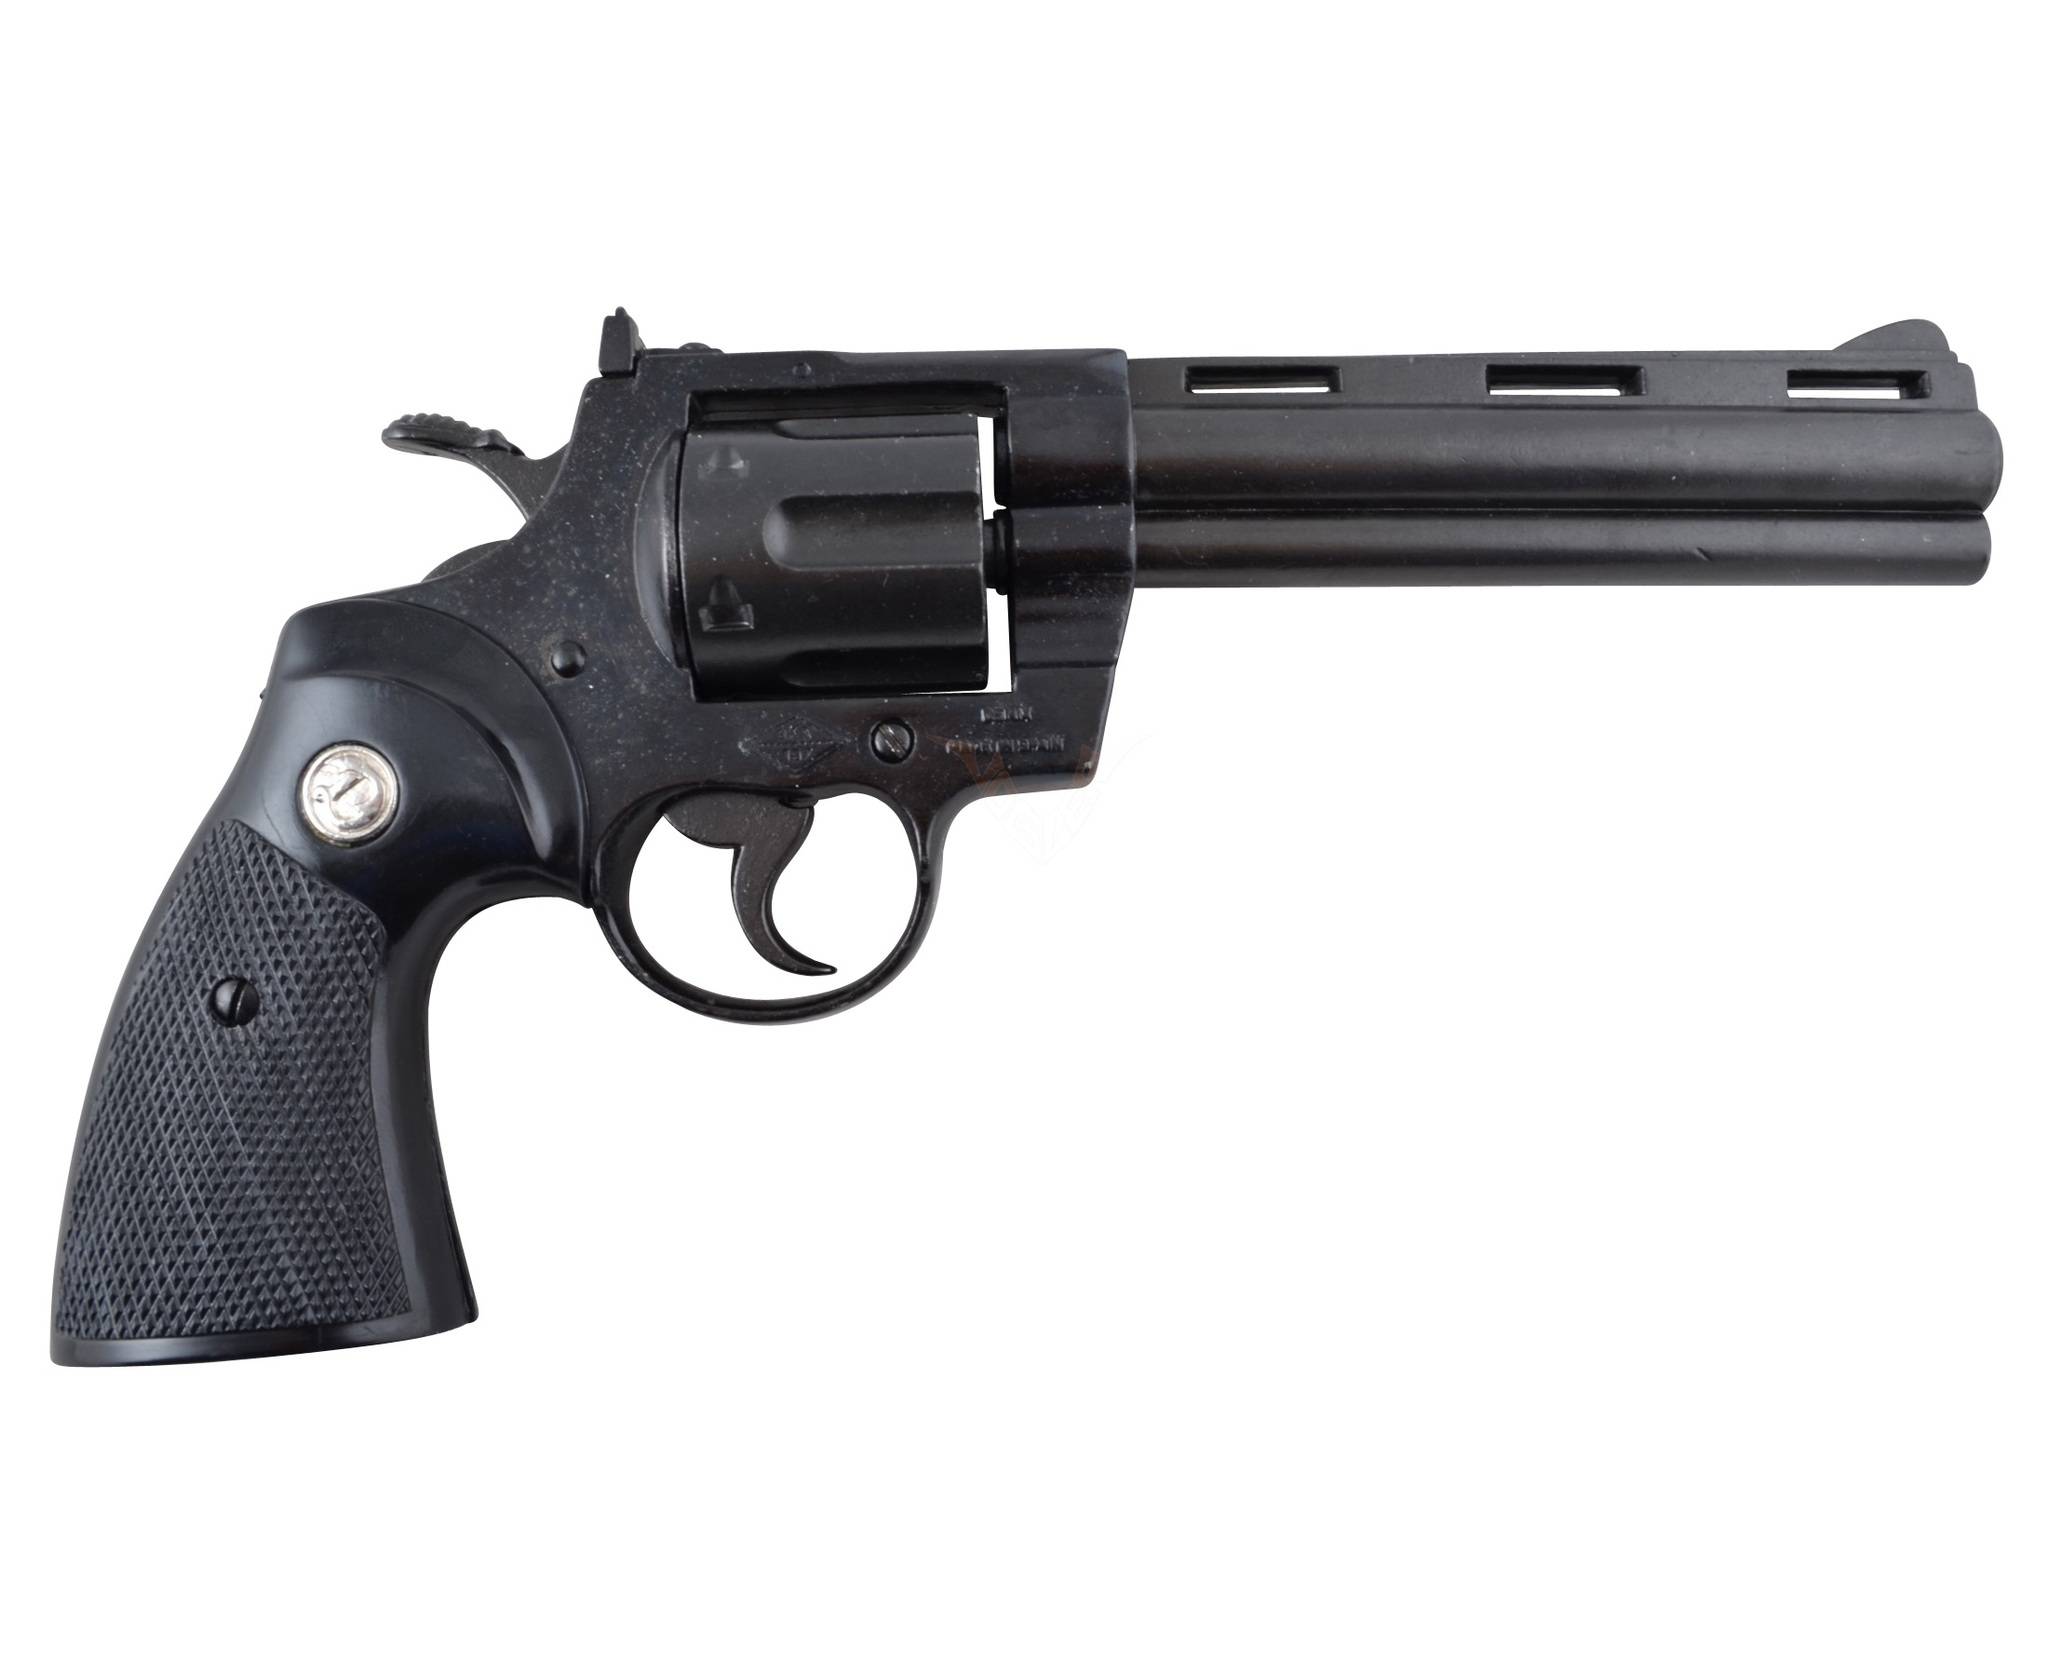 Colt python - internet movie firearms database - guns in movies, tv and video games